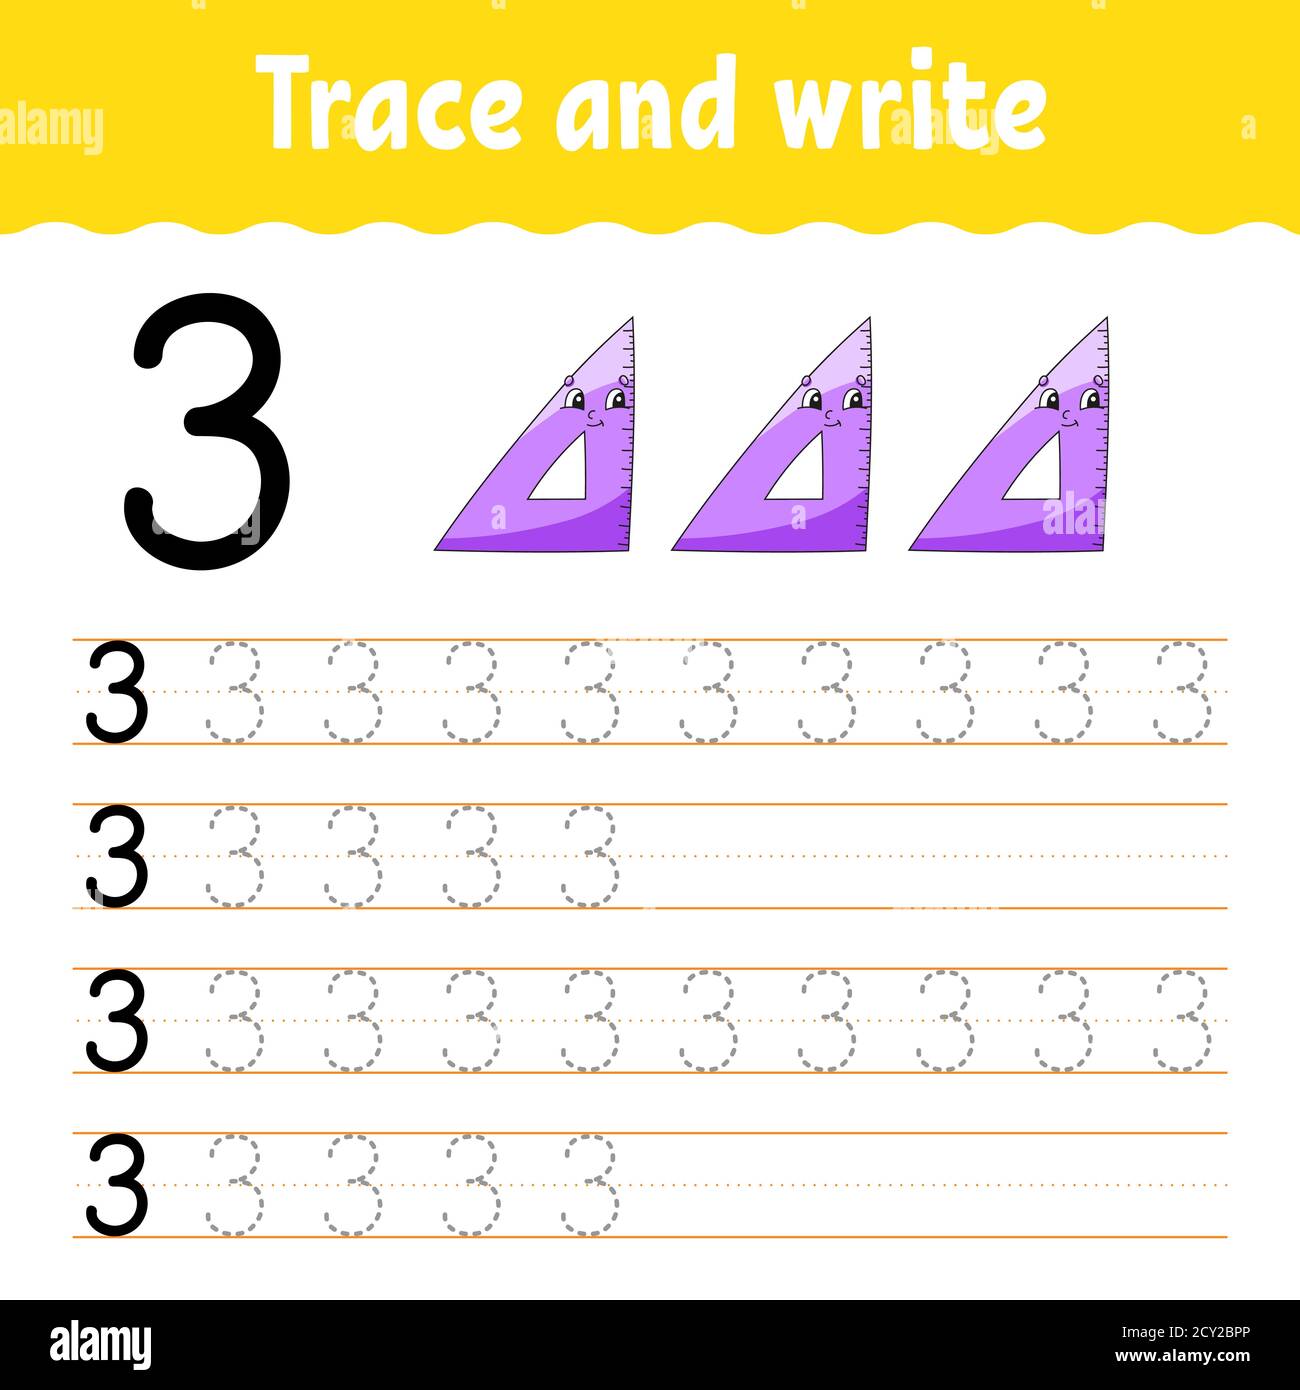 Learn Numbers. Trace and write. Back to school. Handwriting